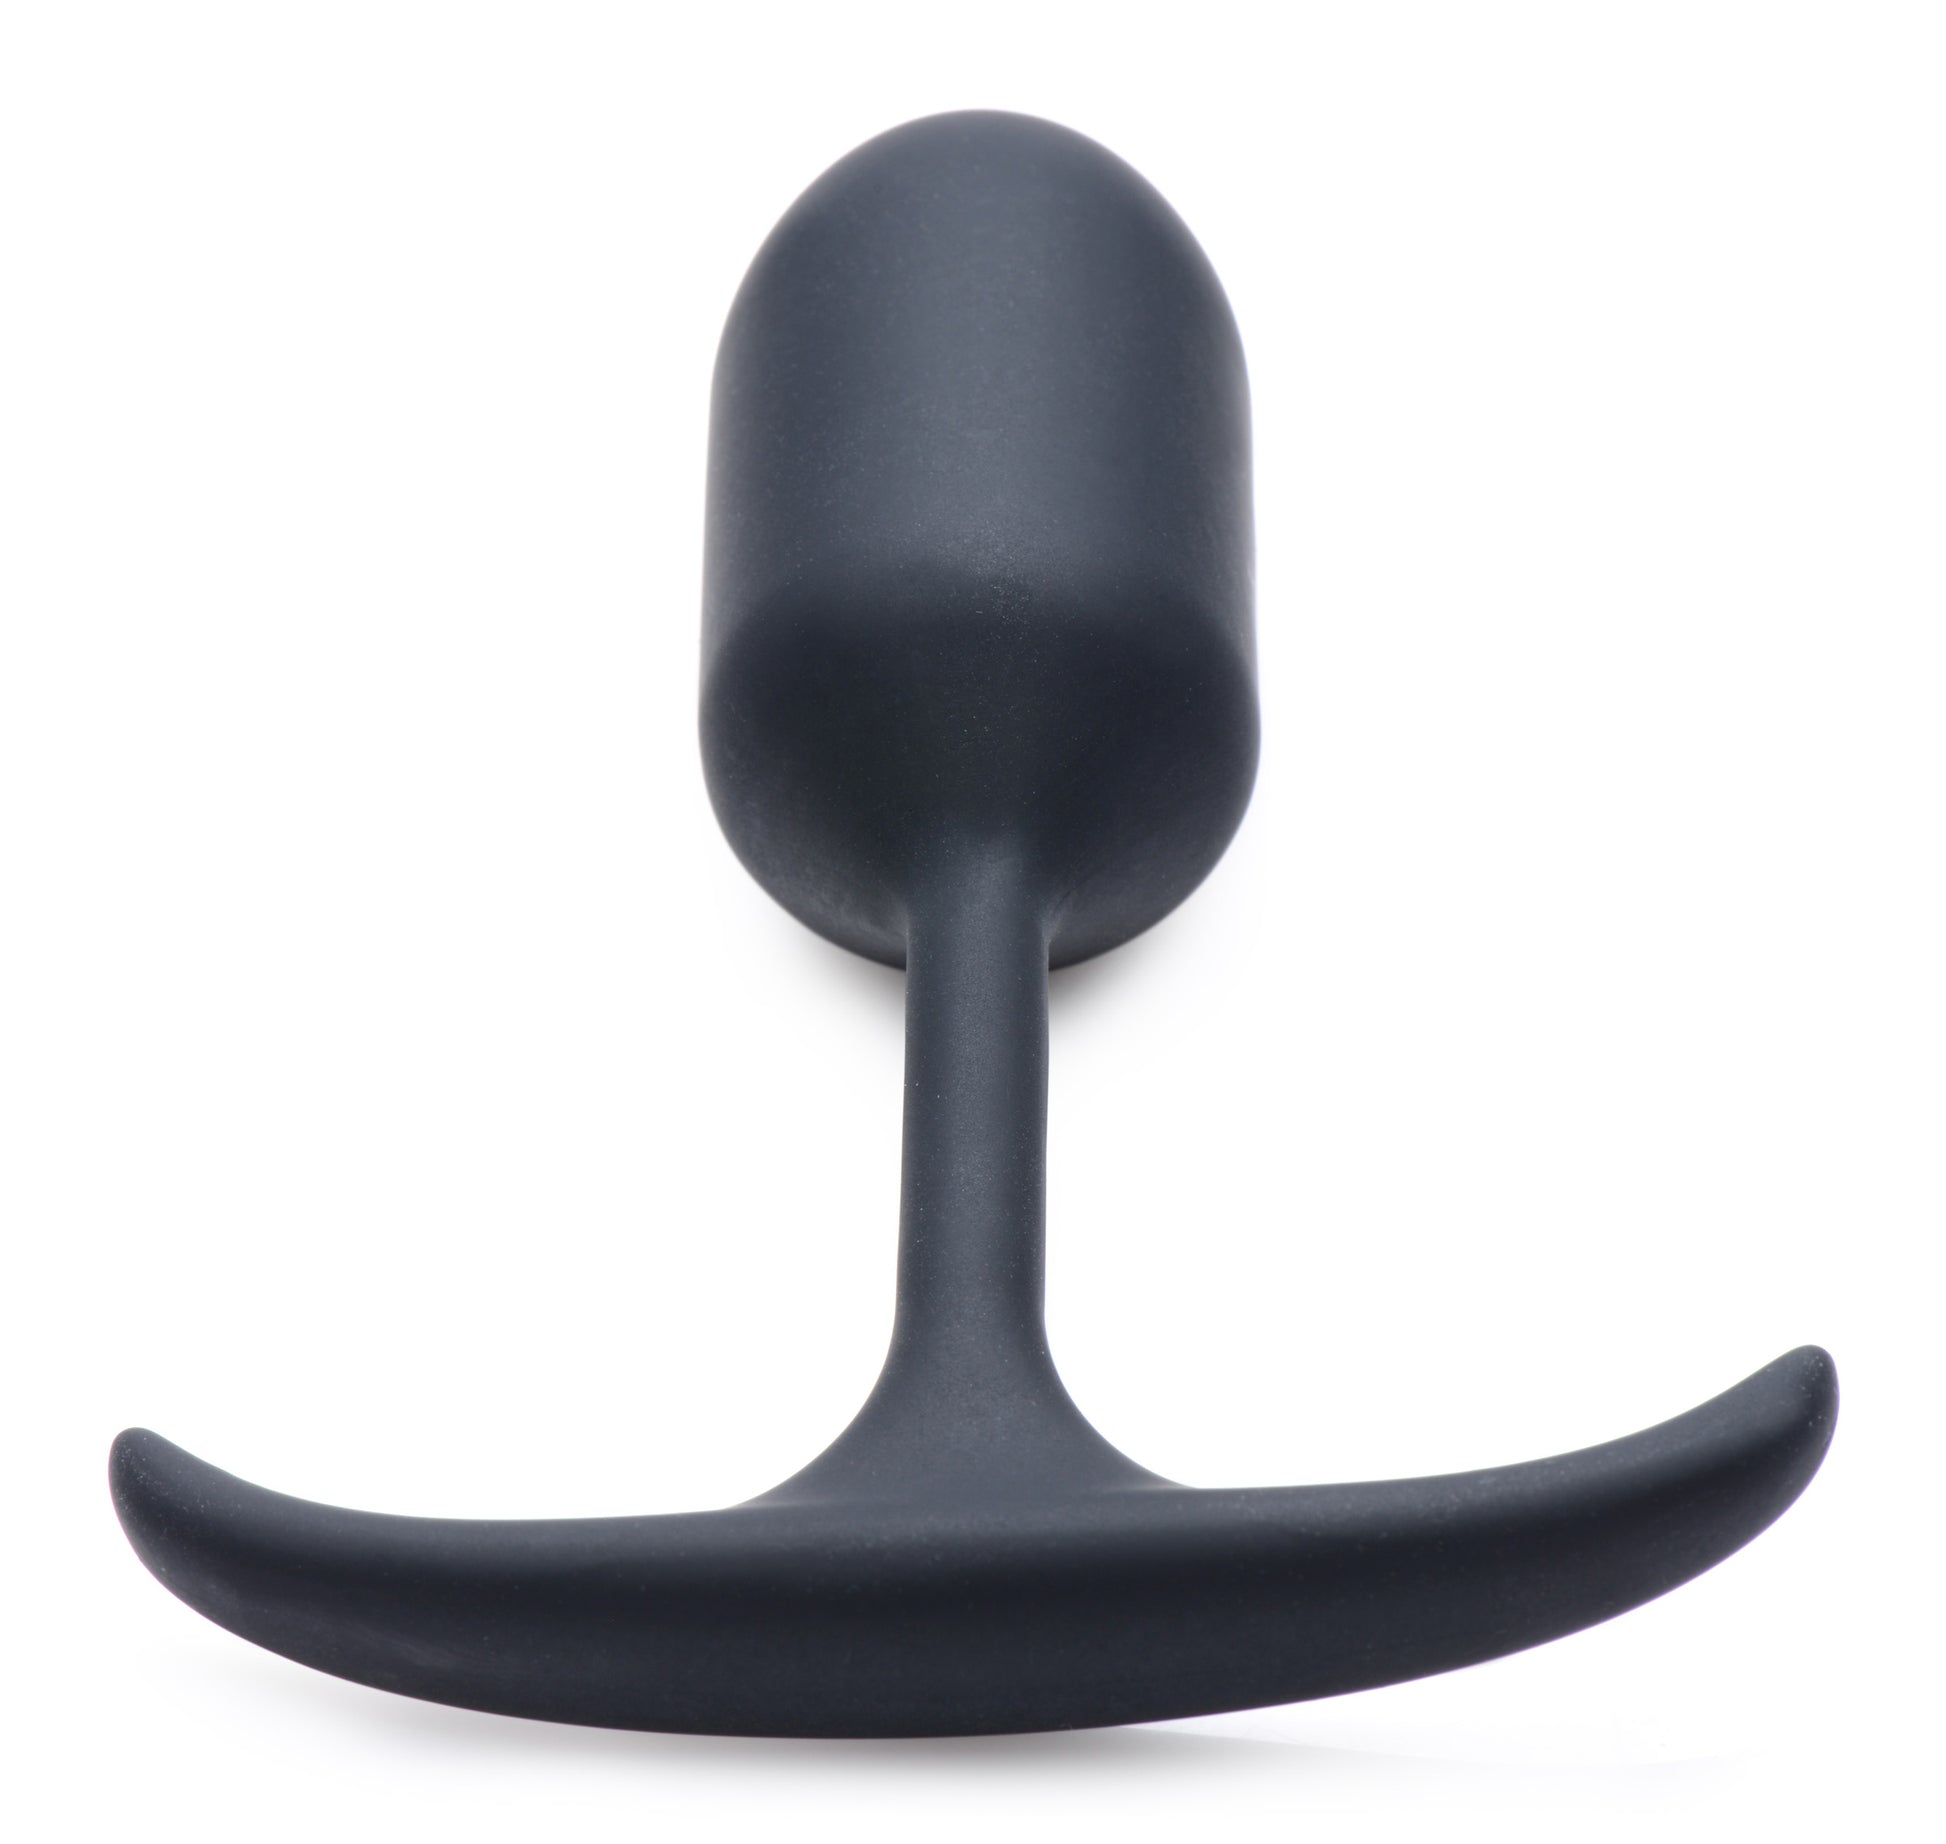 Premium Silicone Weighted Anal Plug - Small - UABDSM